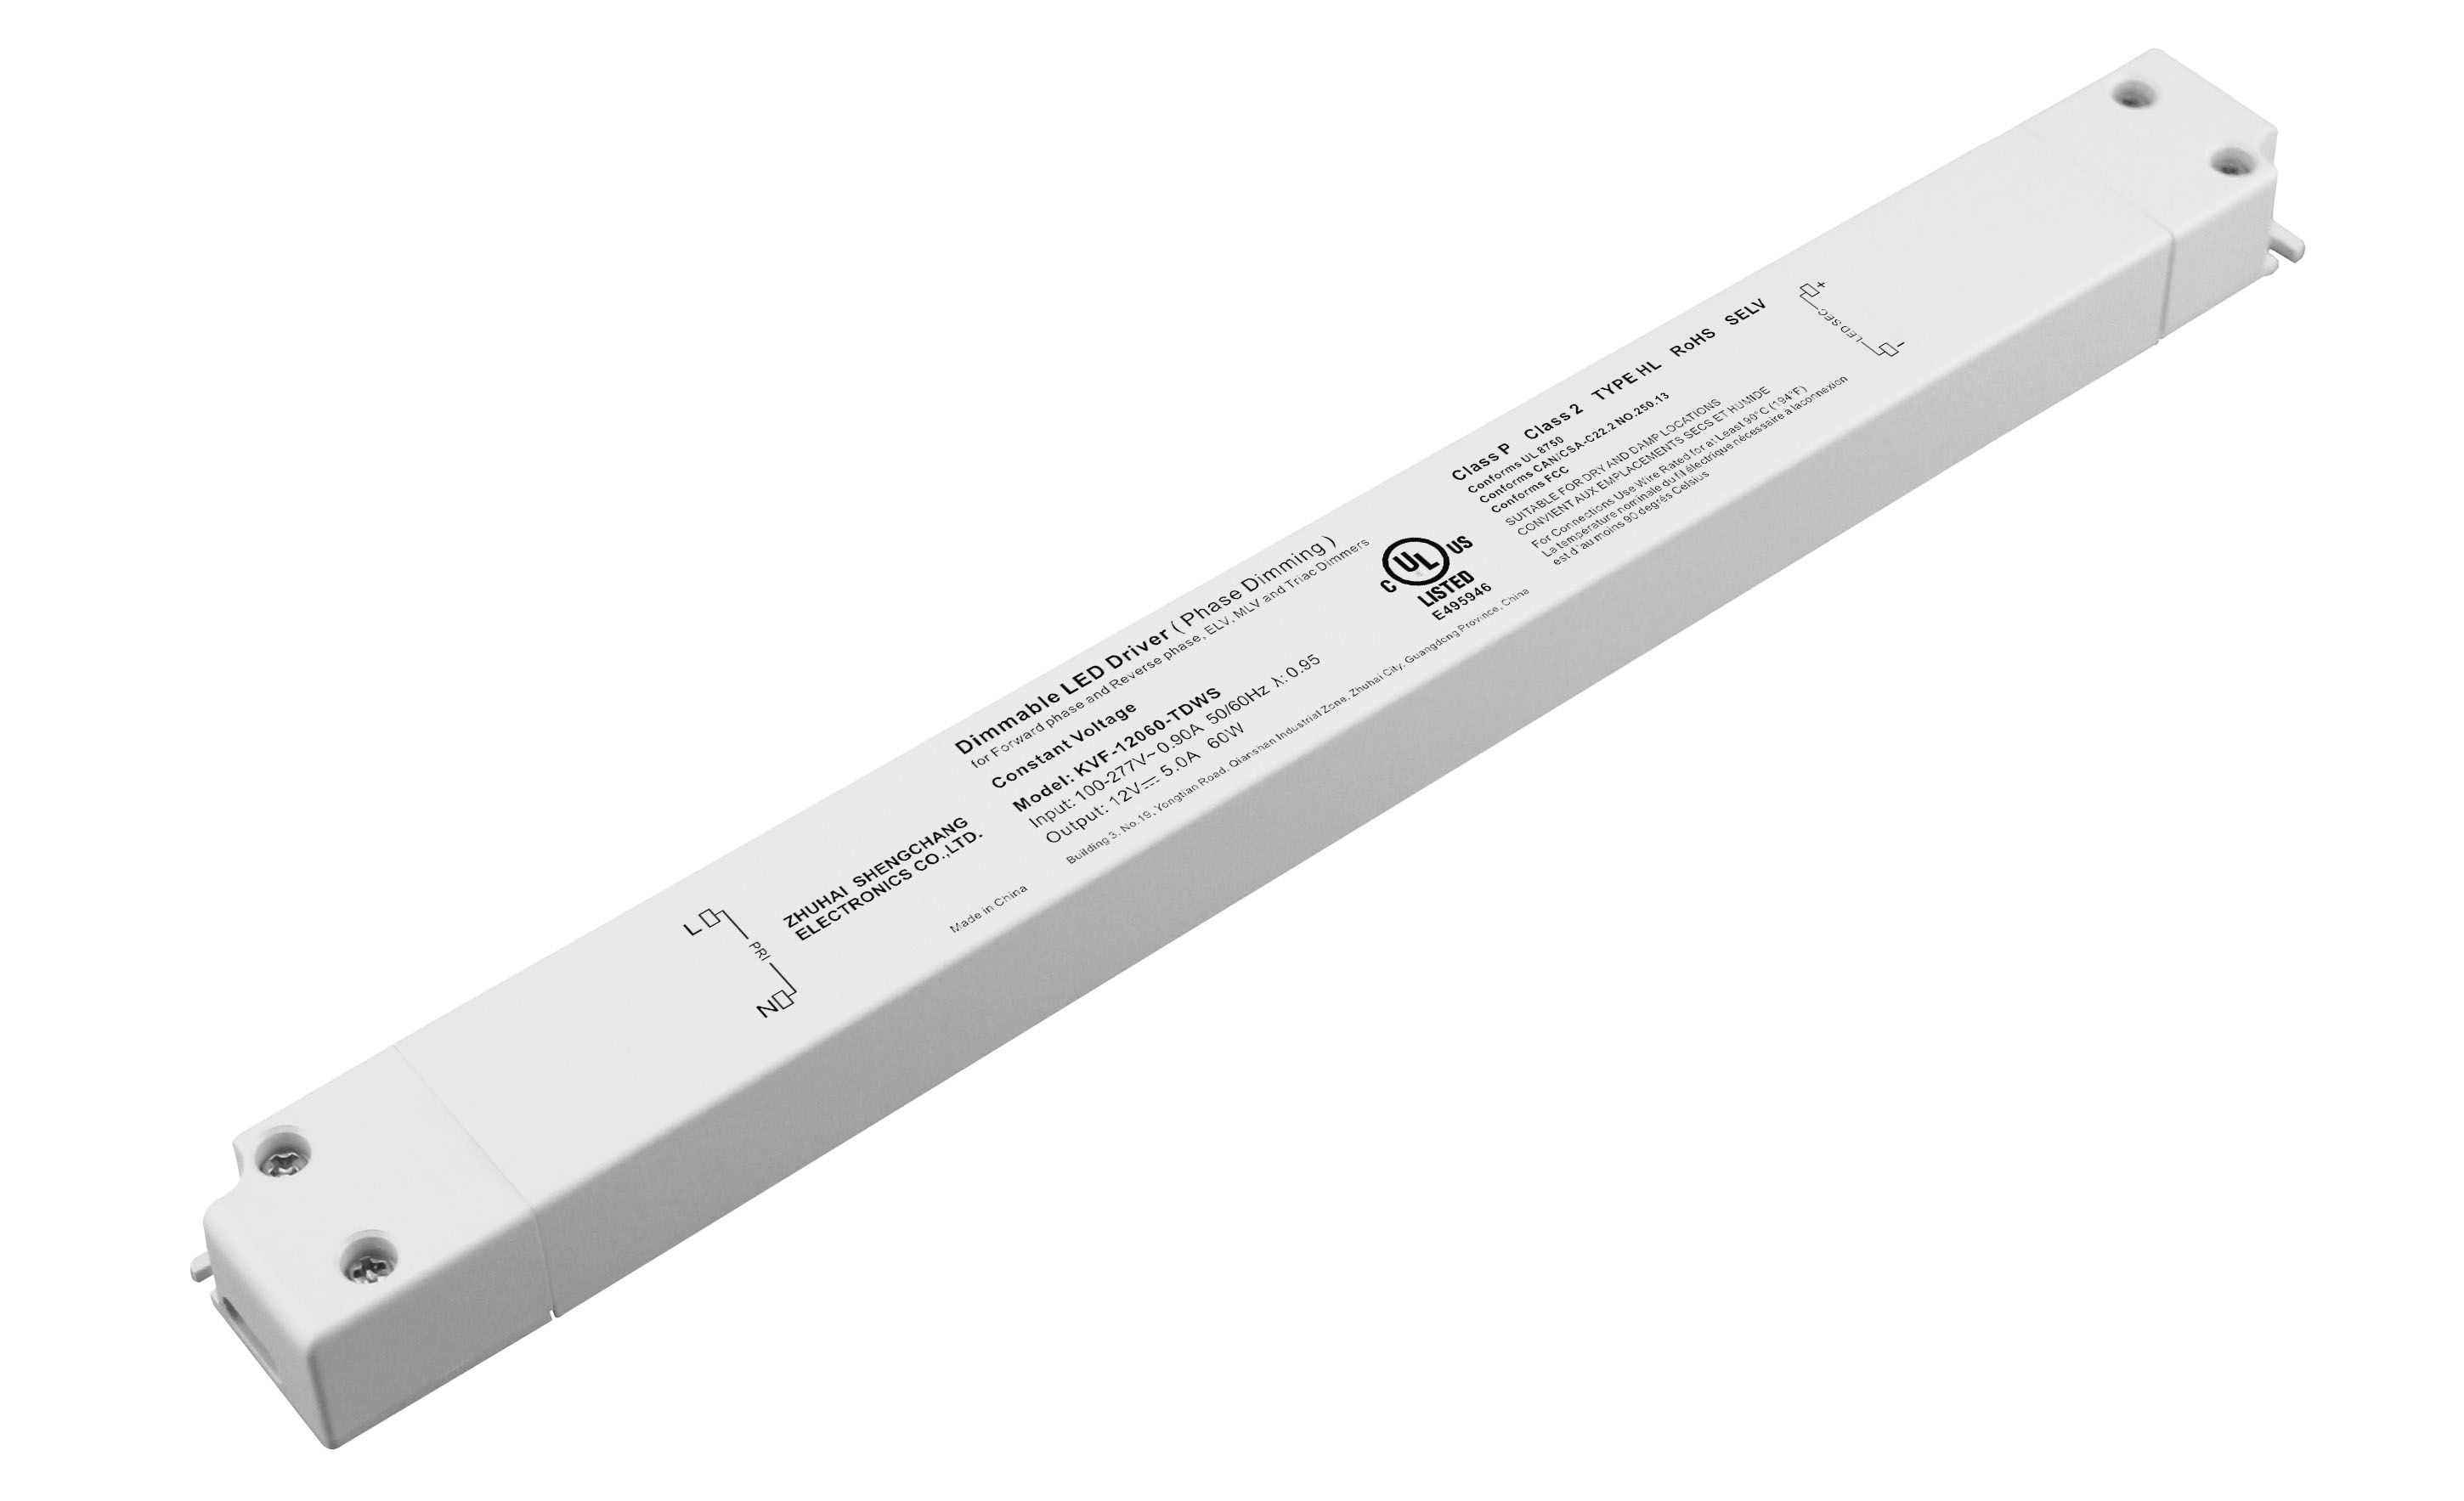 KVF-TDWS Series 60W Constant Voltage Triac Dimmable LED driver